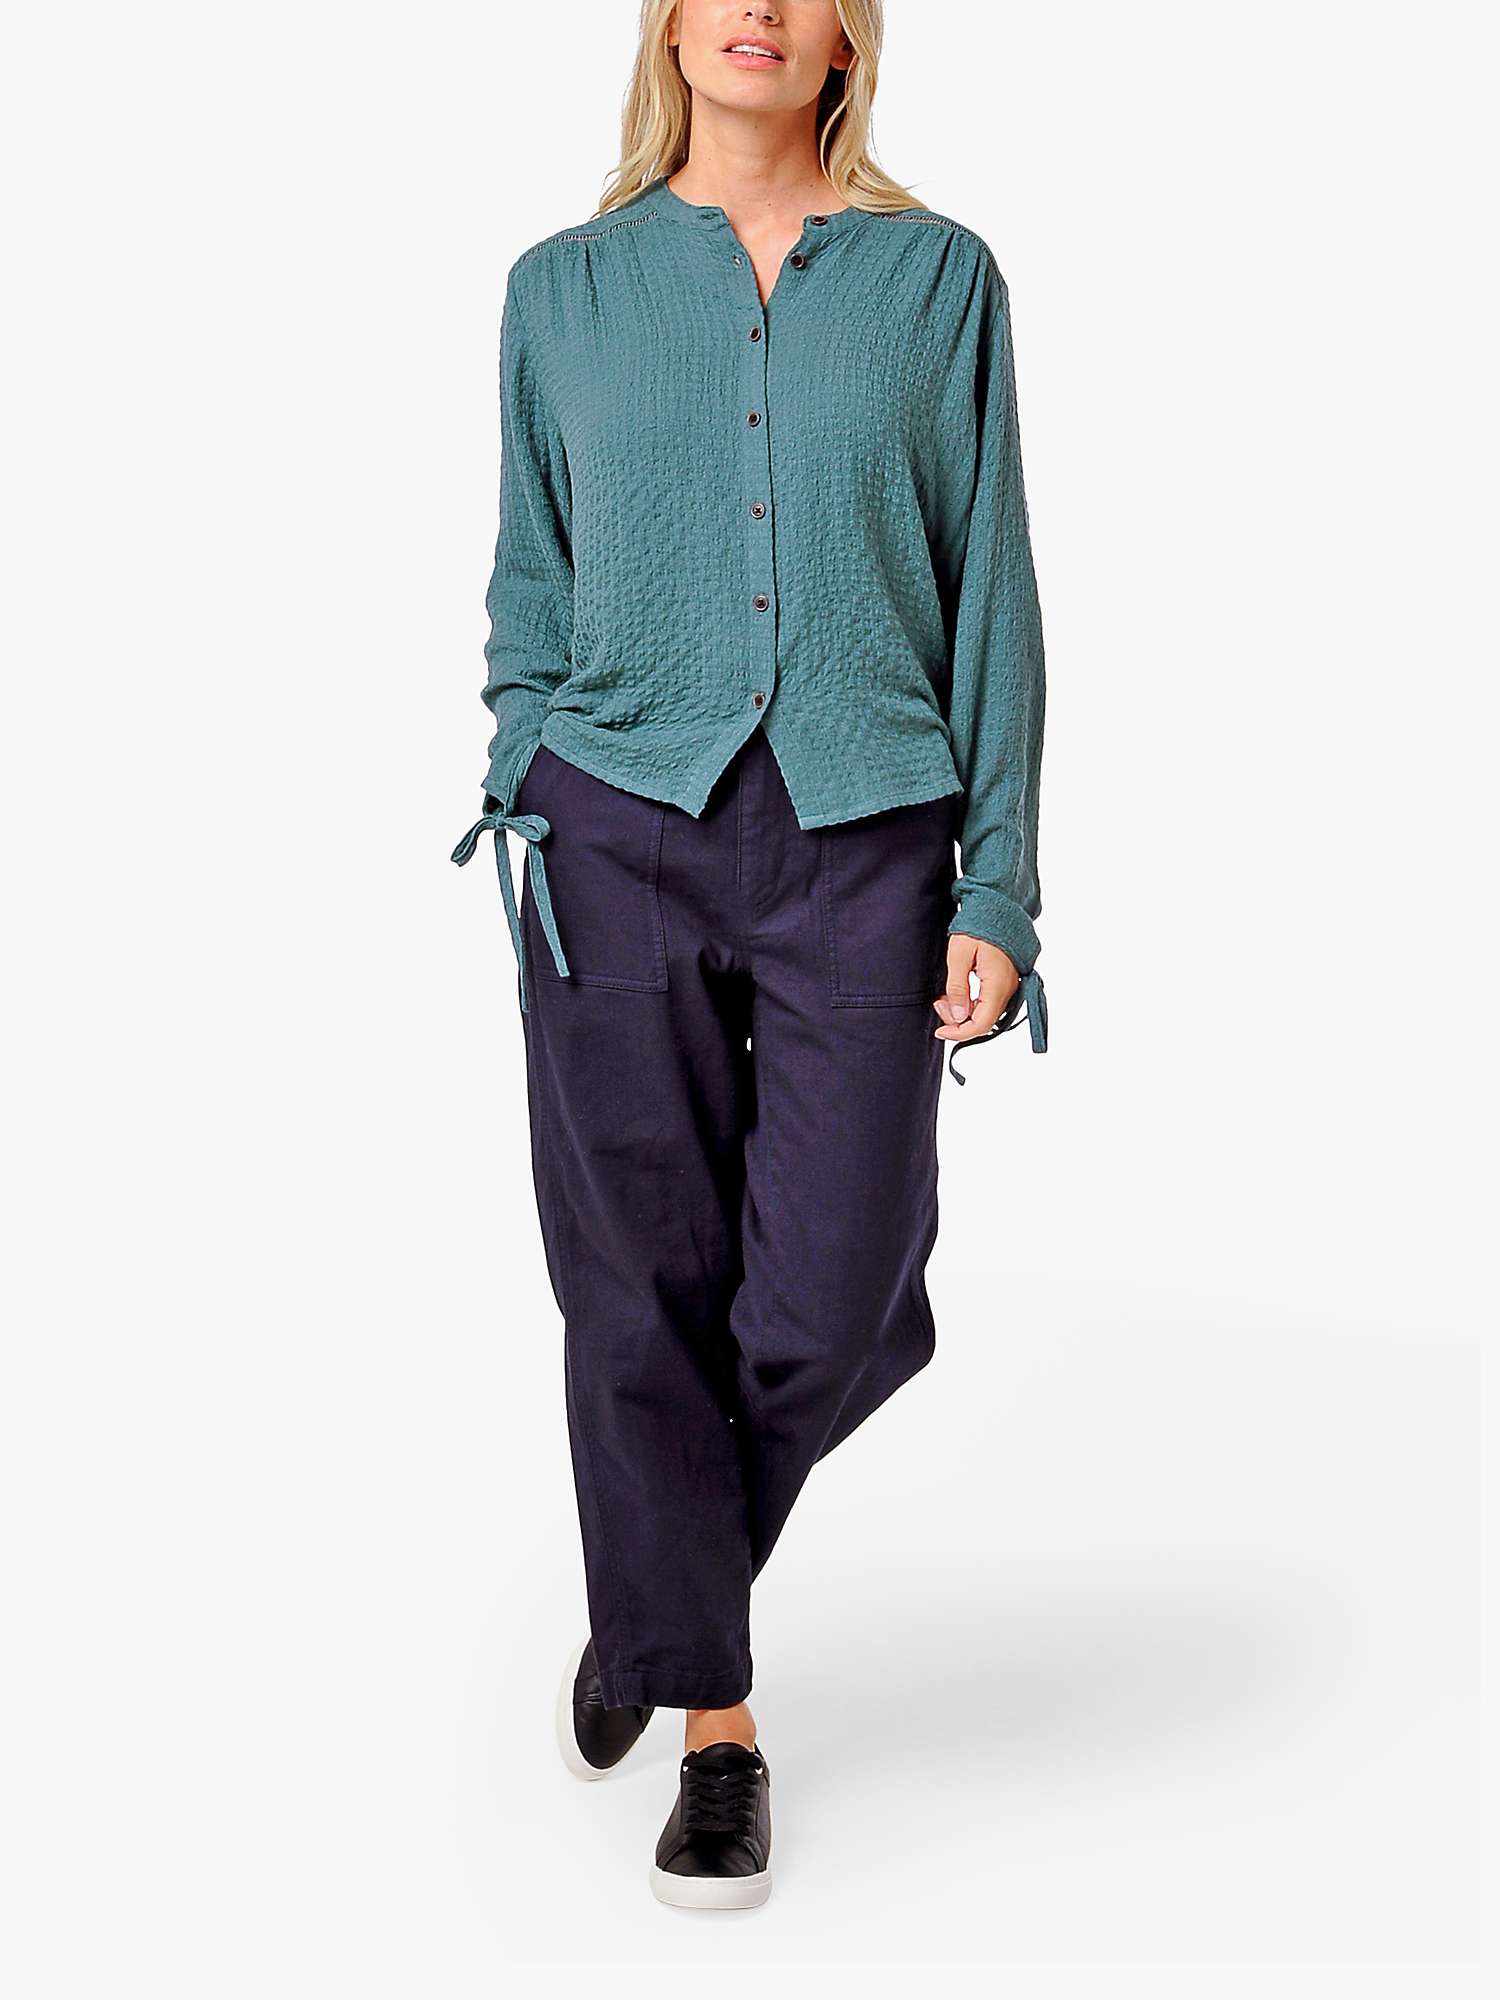 Buy Burgs Bow Textured Blouse Online at johnlewis.com